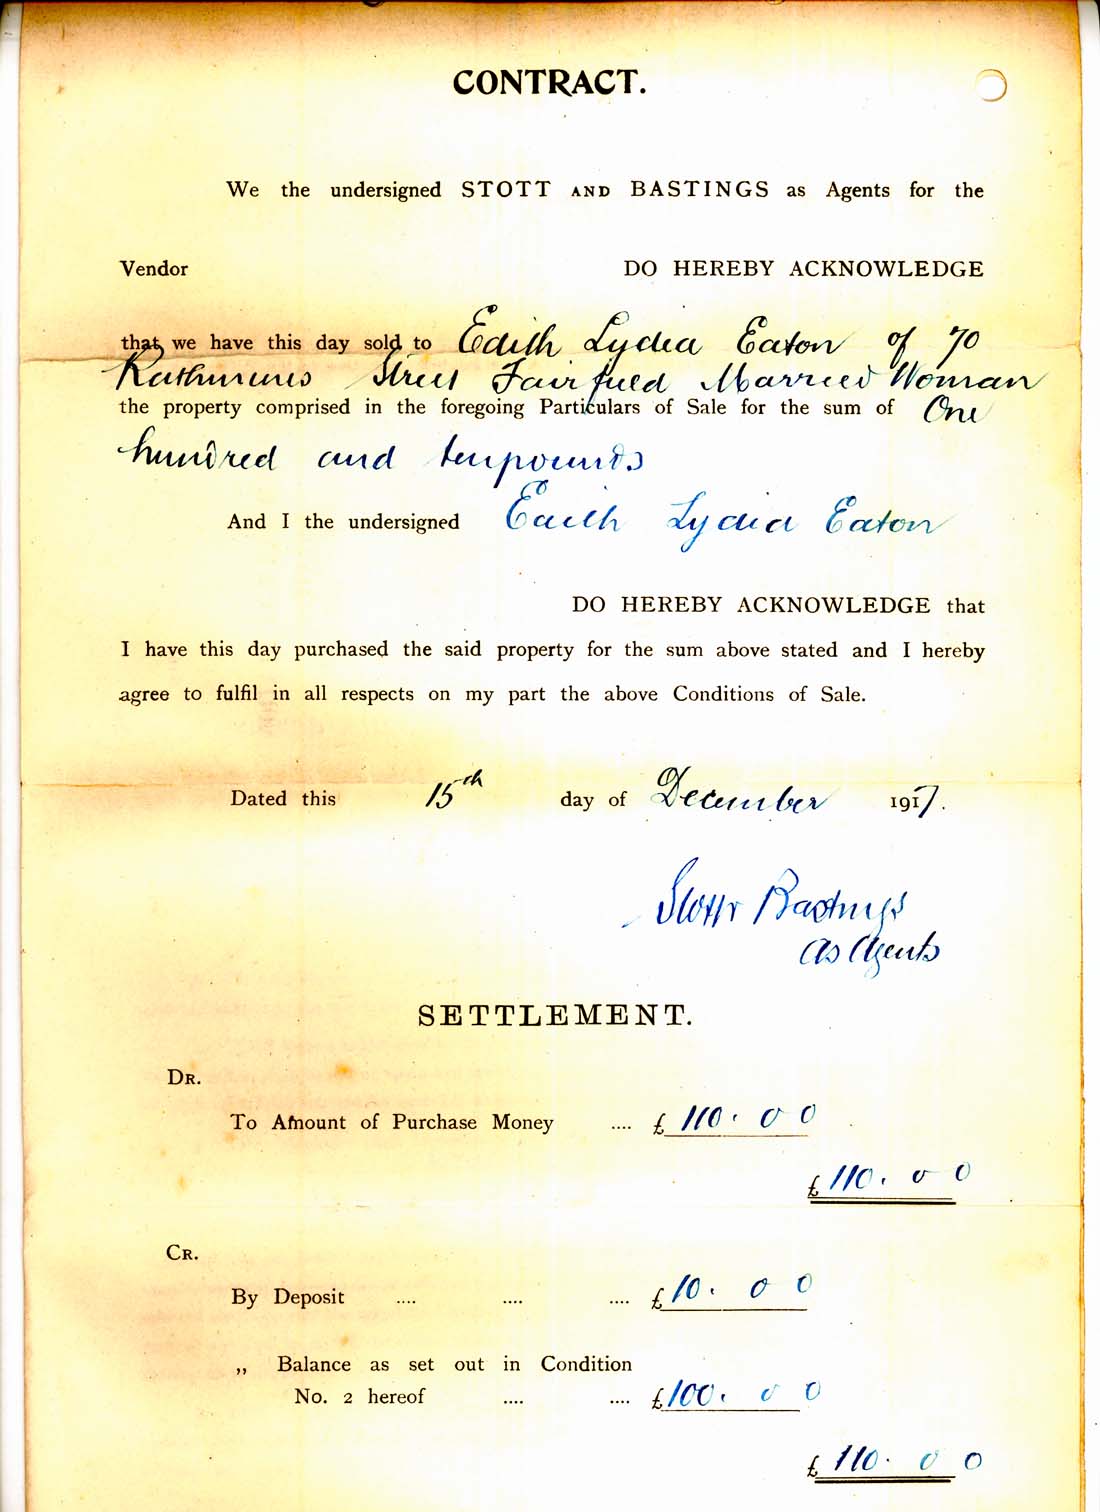 Image of a Transfer of land document Fairfield Railway Station Estate for Mrs Eation